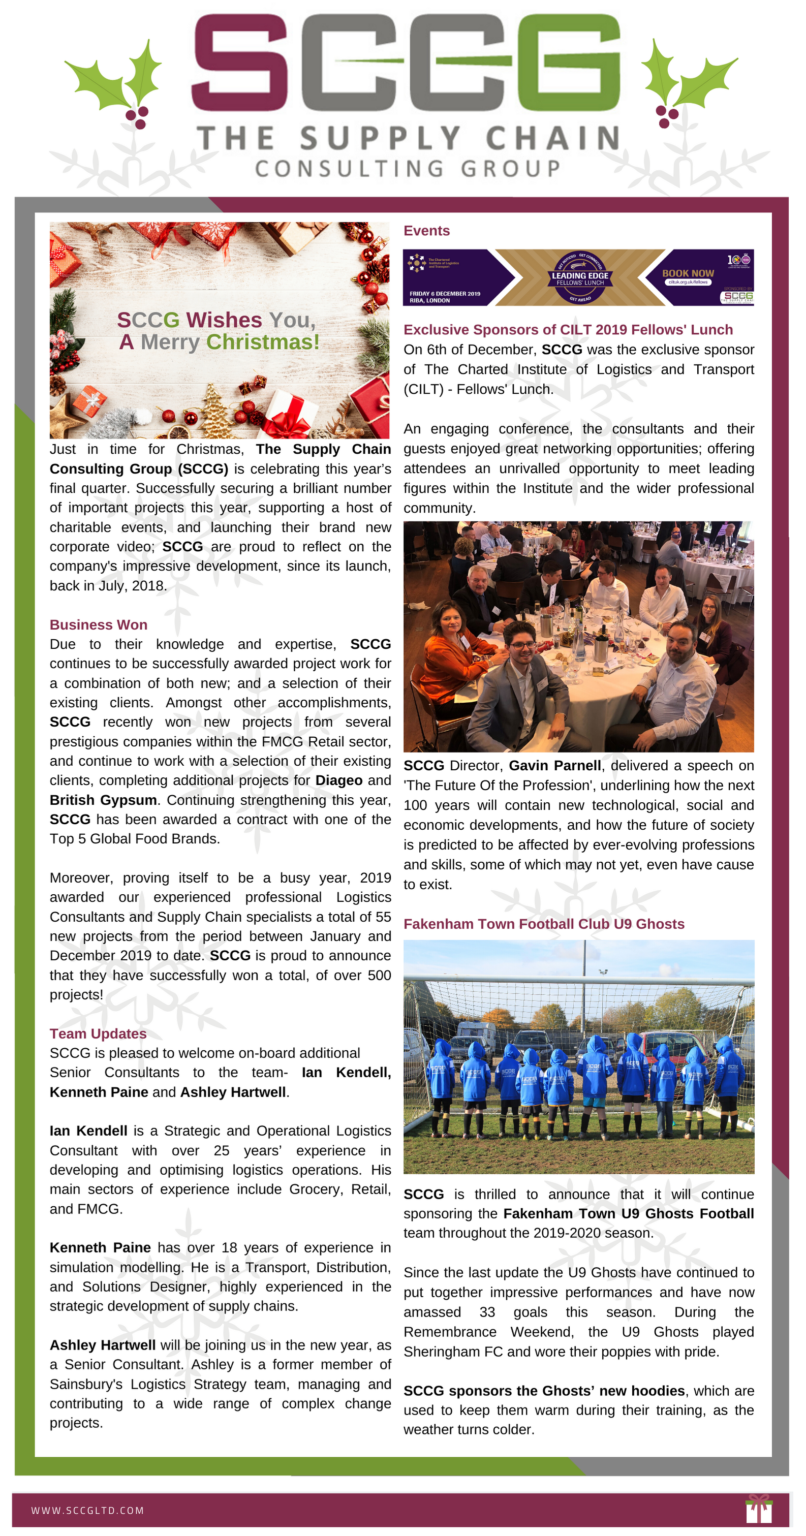 SCCG Presents the Quarter Four Newsletter, which includes their latest achievements, events and newest team members.